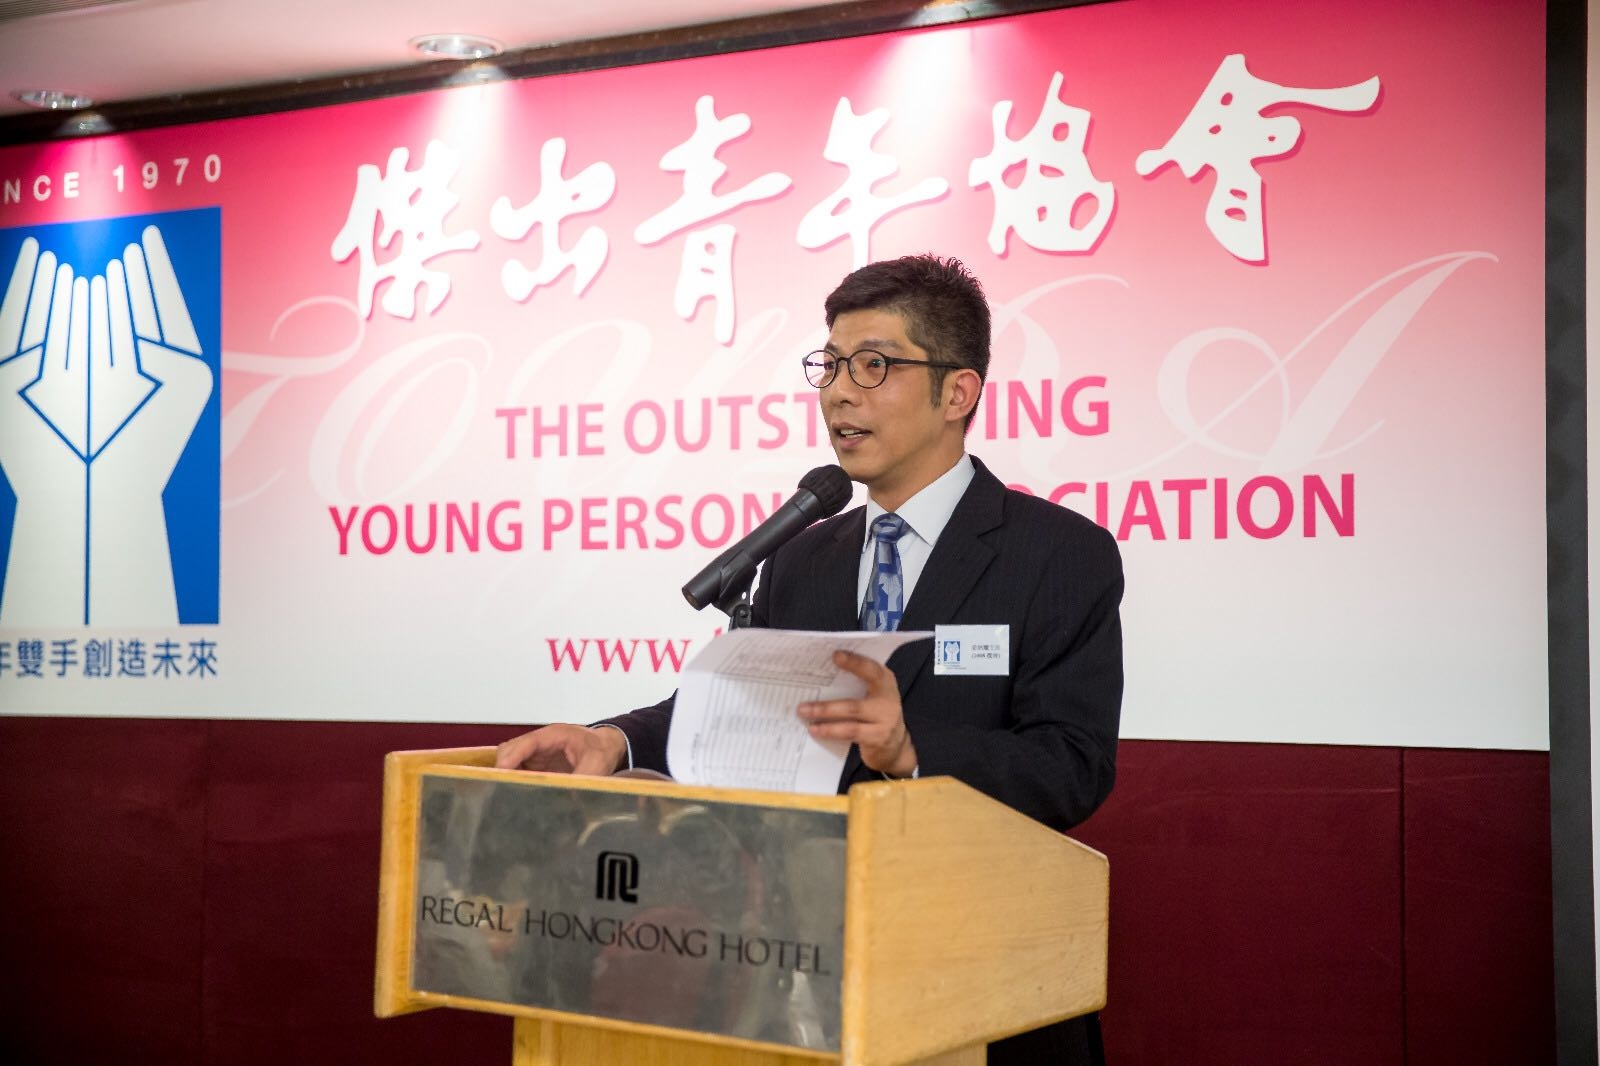 Ben won the Outstanding Young Person award in 2008.